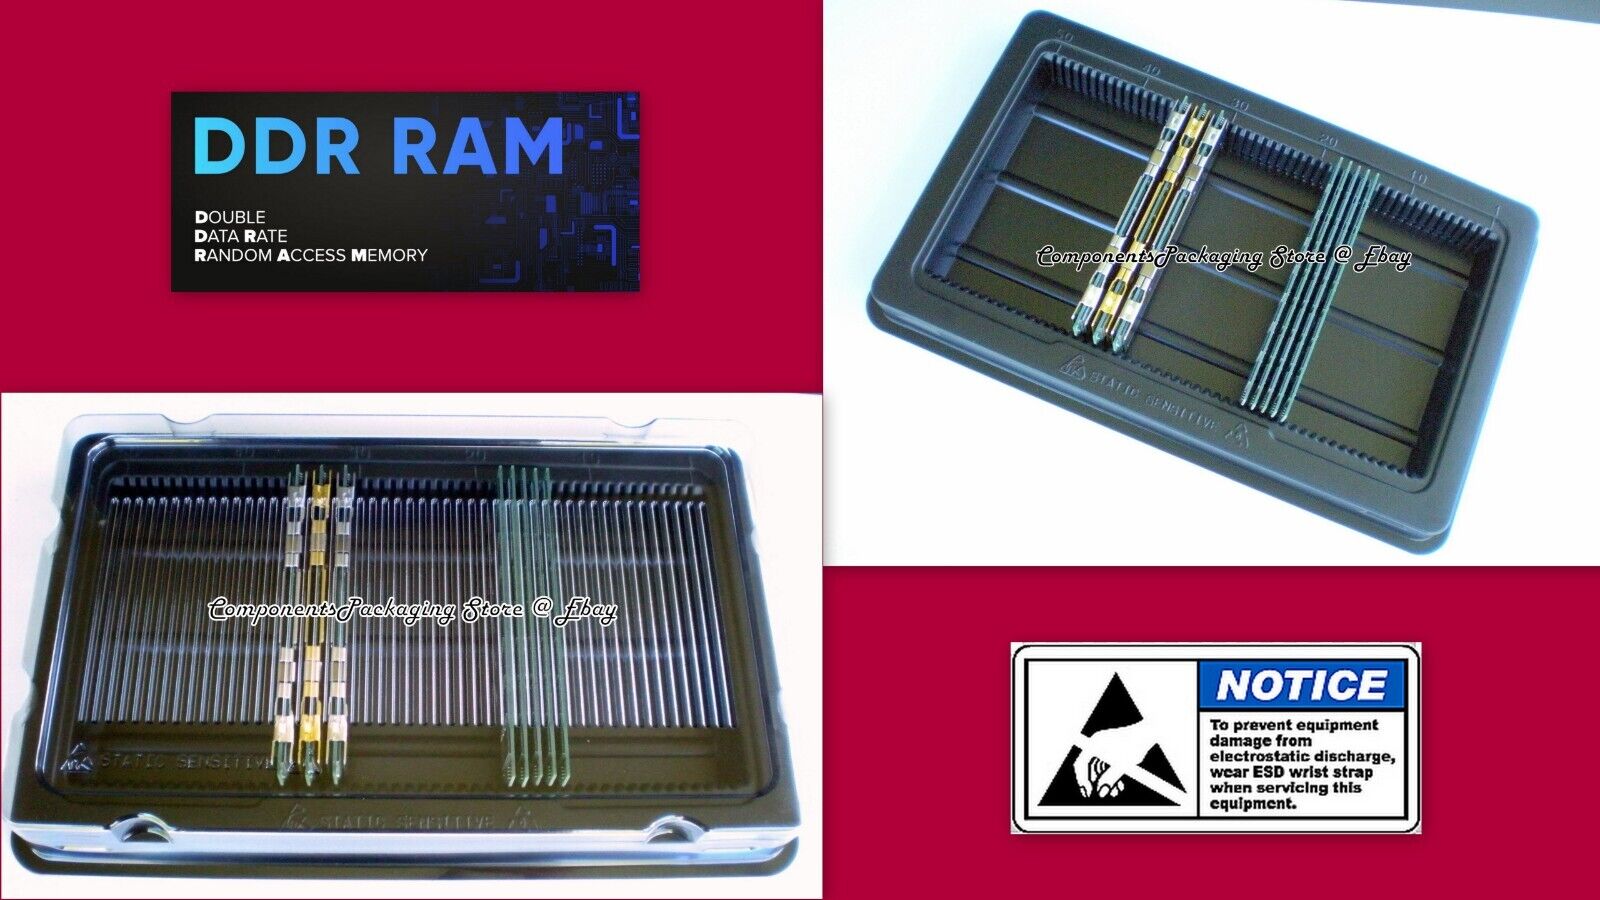 RAM Memory Packaging 50 Trays Fits up to 2500 DDR UDIMM FDIMM RDIMM  Anti Static